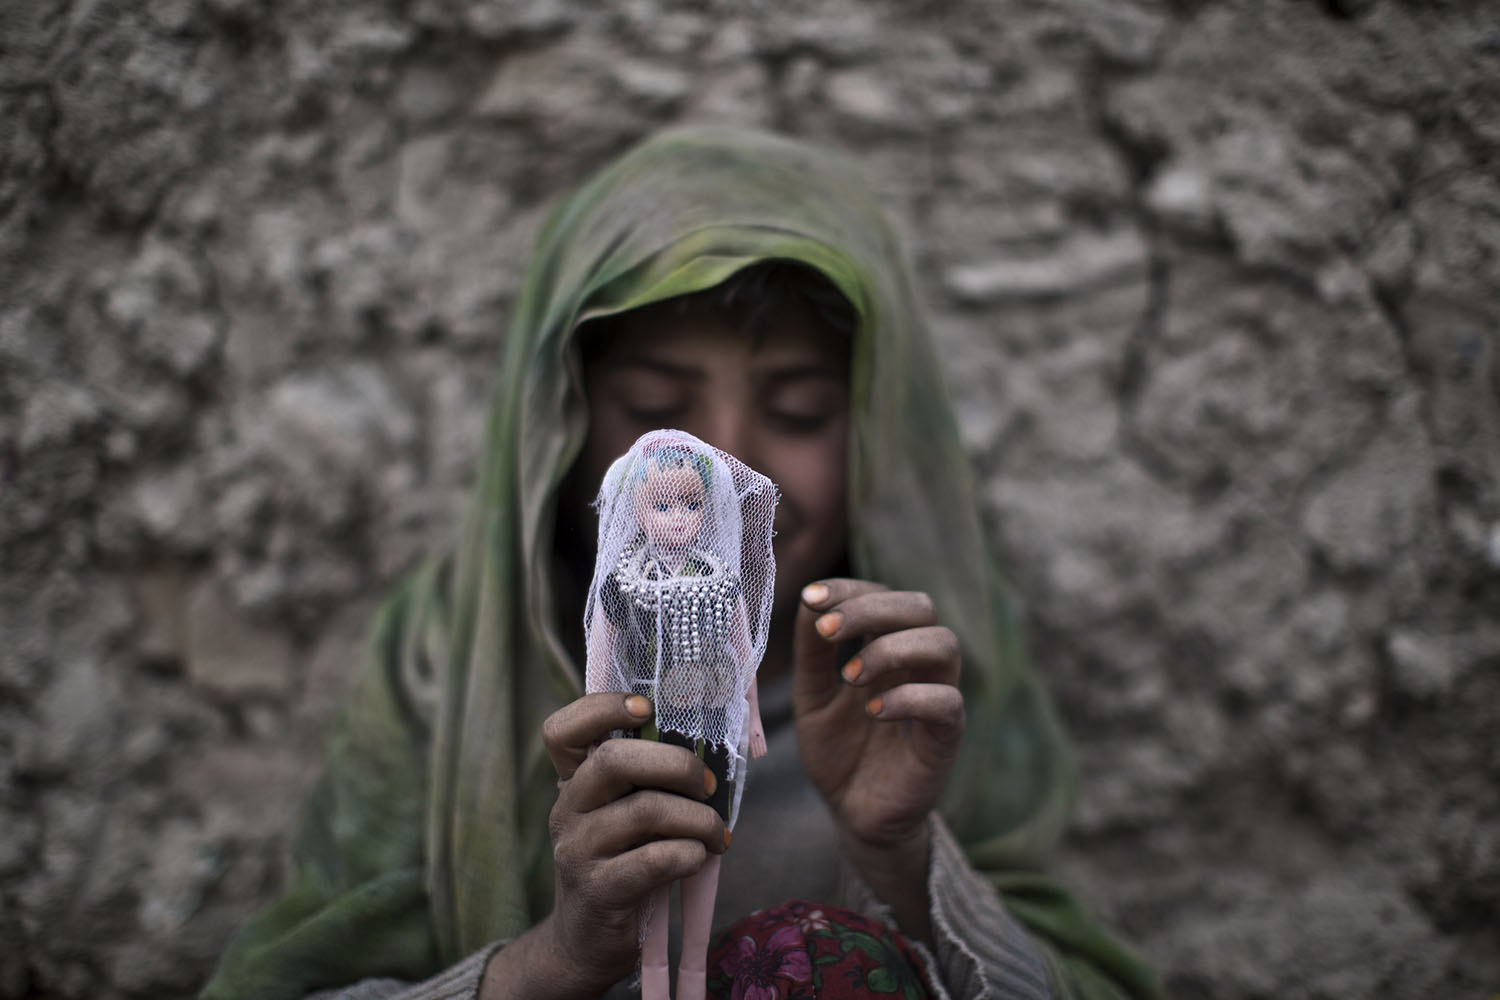 Apr. 3, 2014. An Afghan girl sits on the ground dressing her doll while playing in an alley in Kabul, Afghanistan.